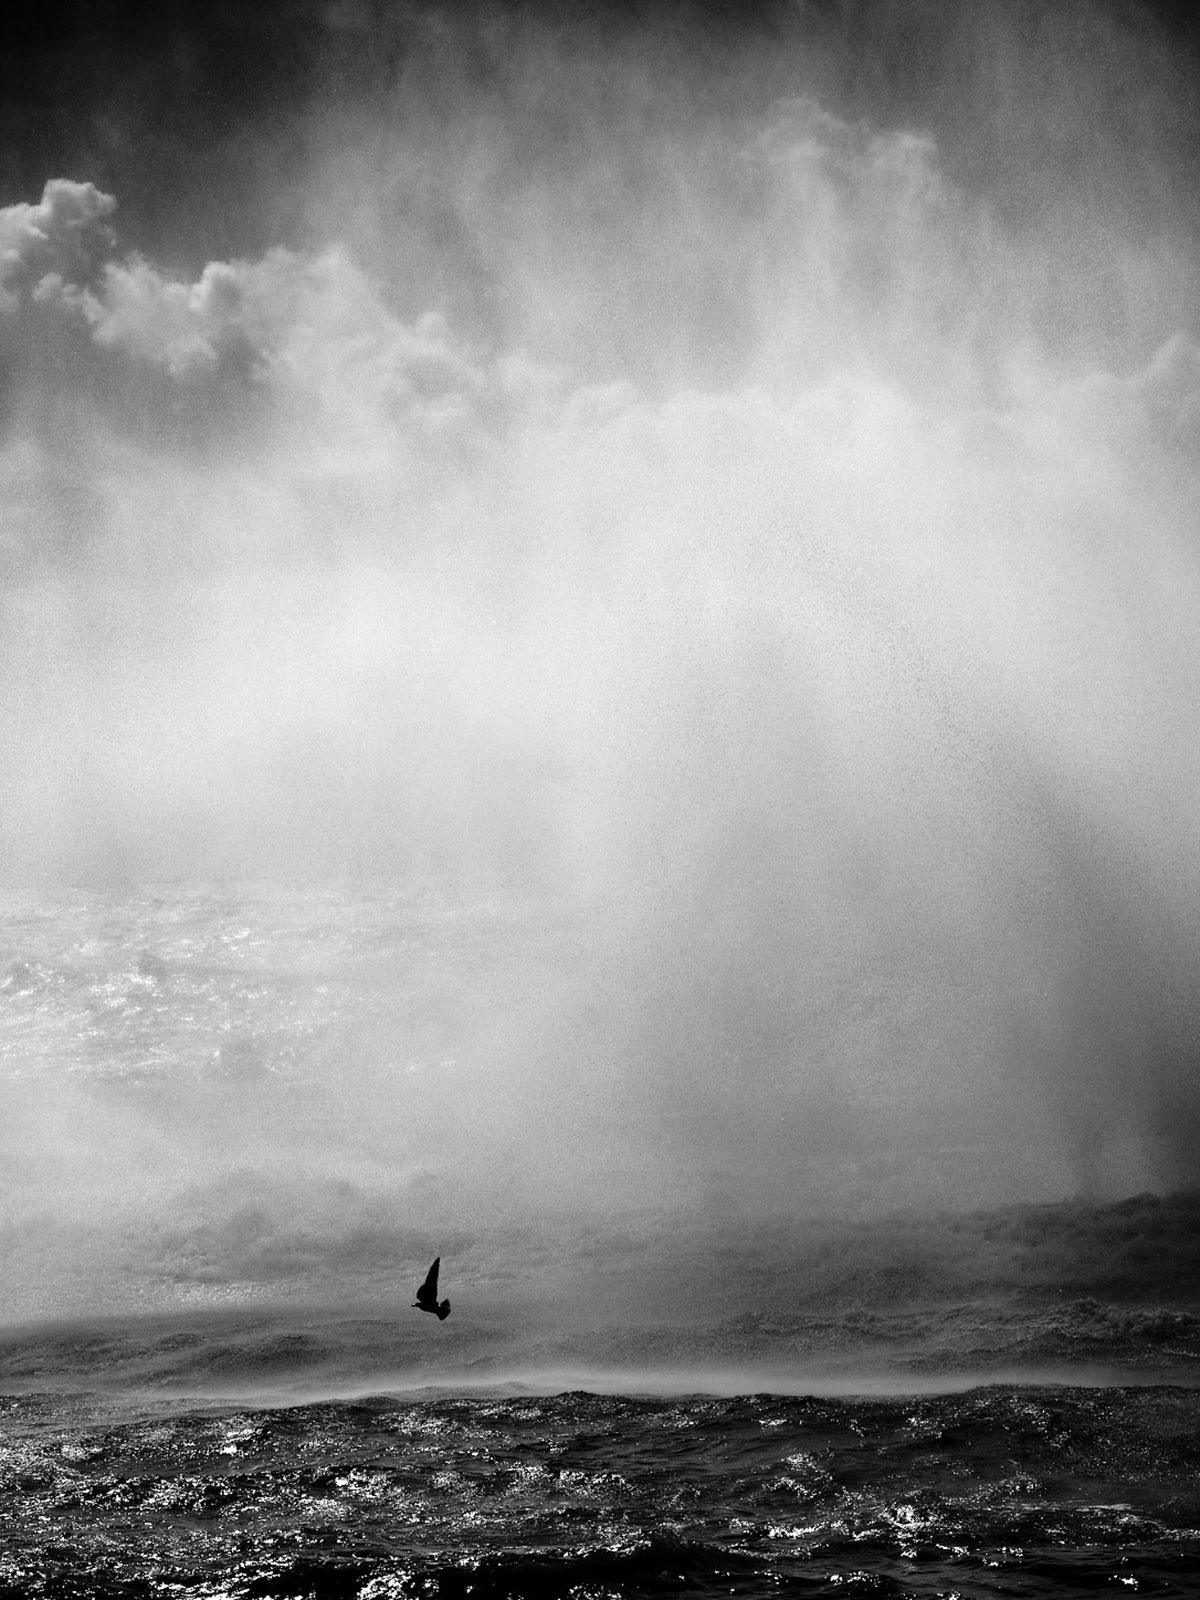 Furore (newest series by Alessandro Puccinelli, seascape photography)